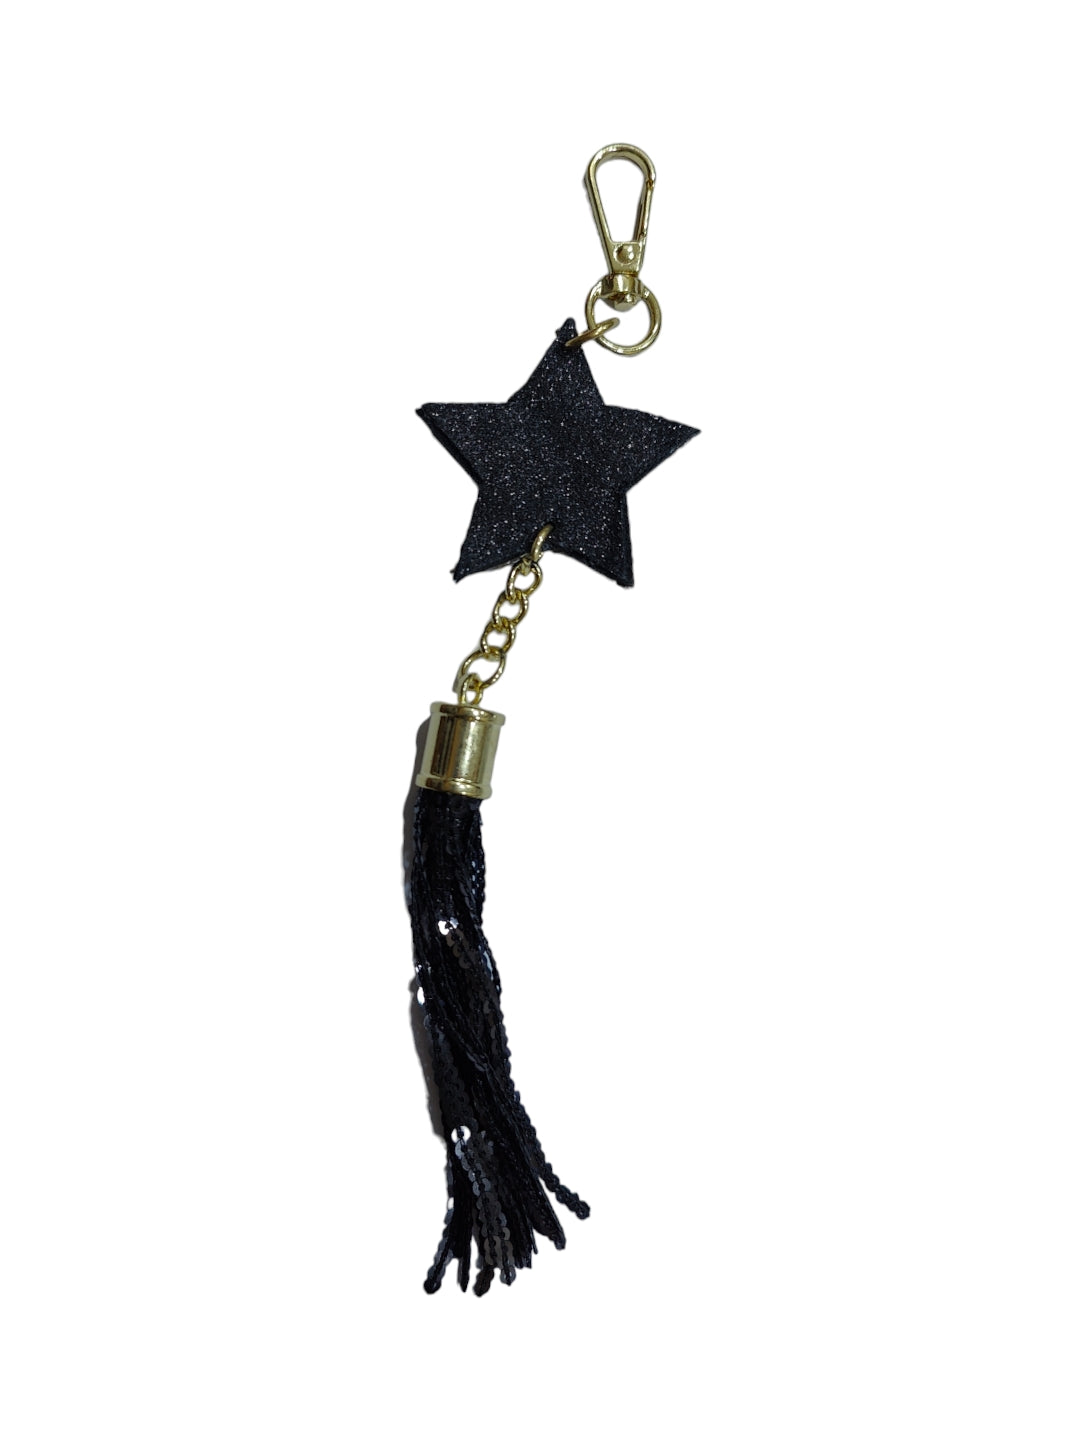 Elevate your bag with our black star charm—a celestial touch for instant style.